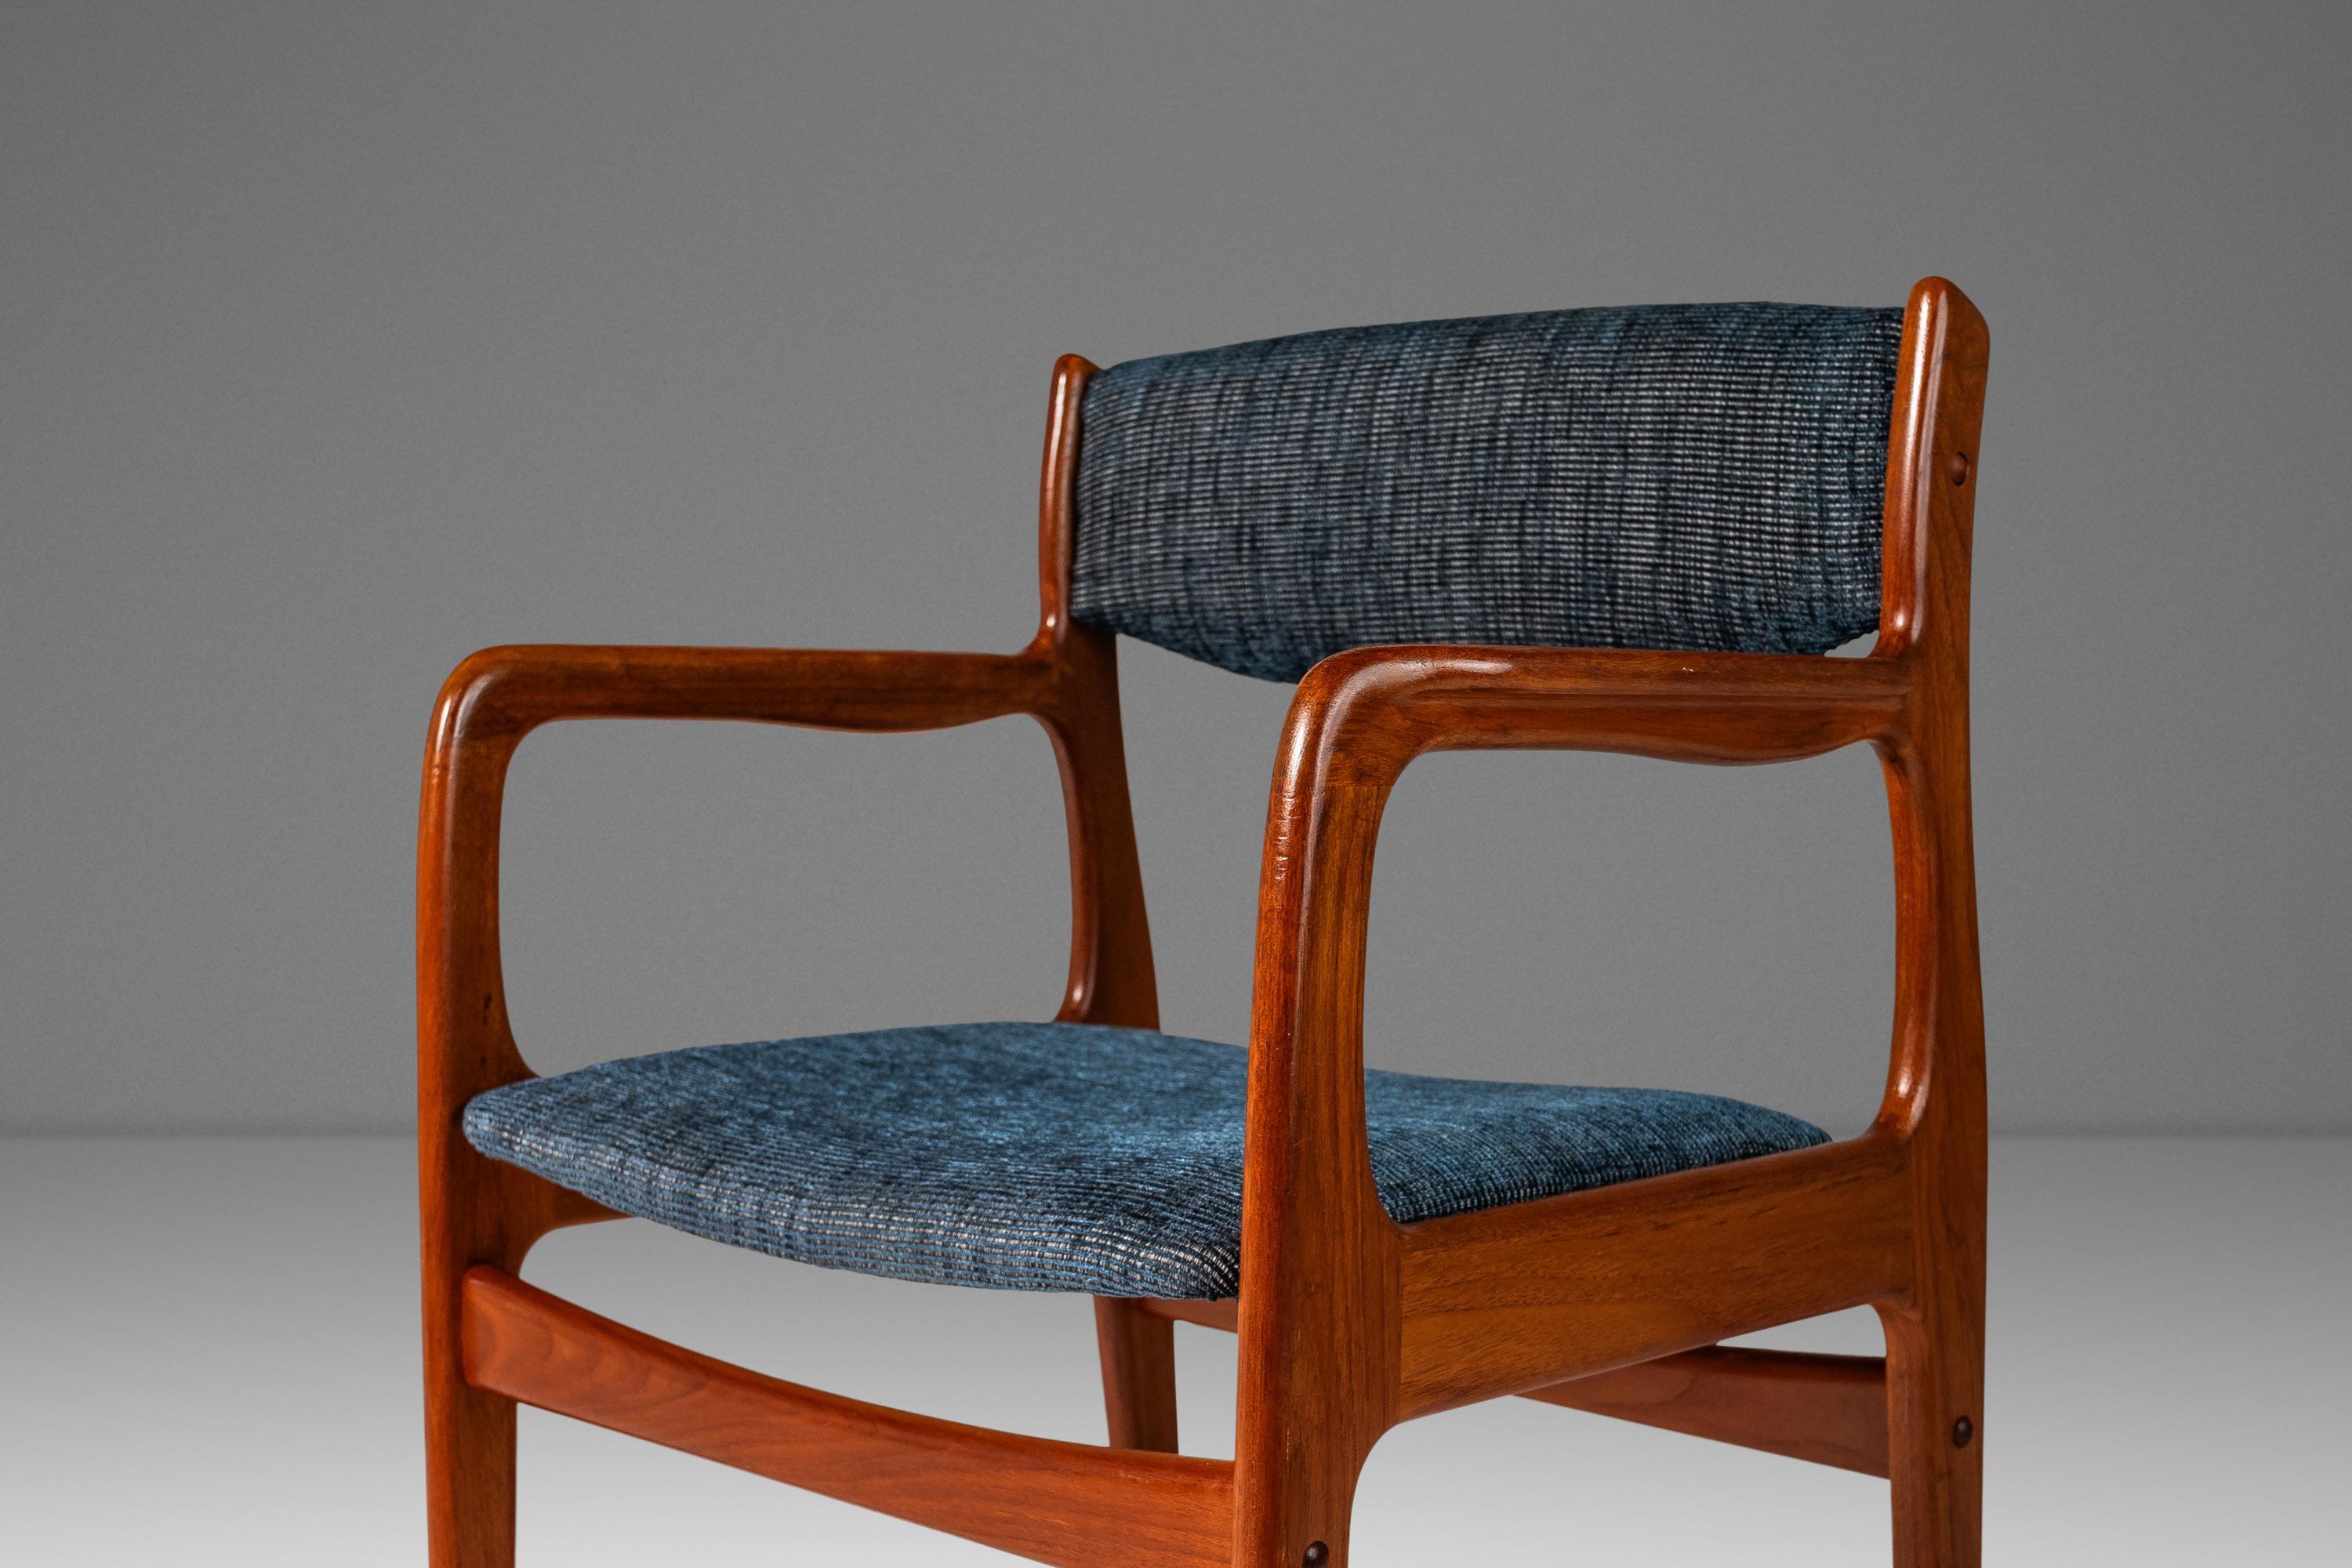 Arm Chair in Solid Teak and New Upholstery by Benny Linden Designs, c. 1970s For Sale 6